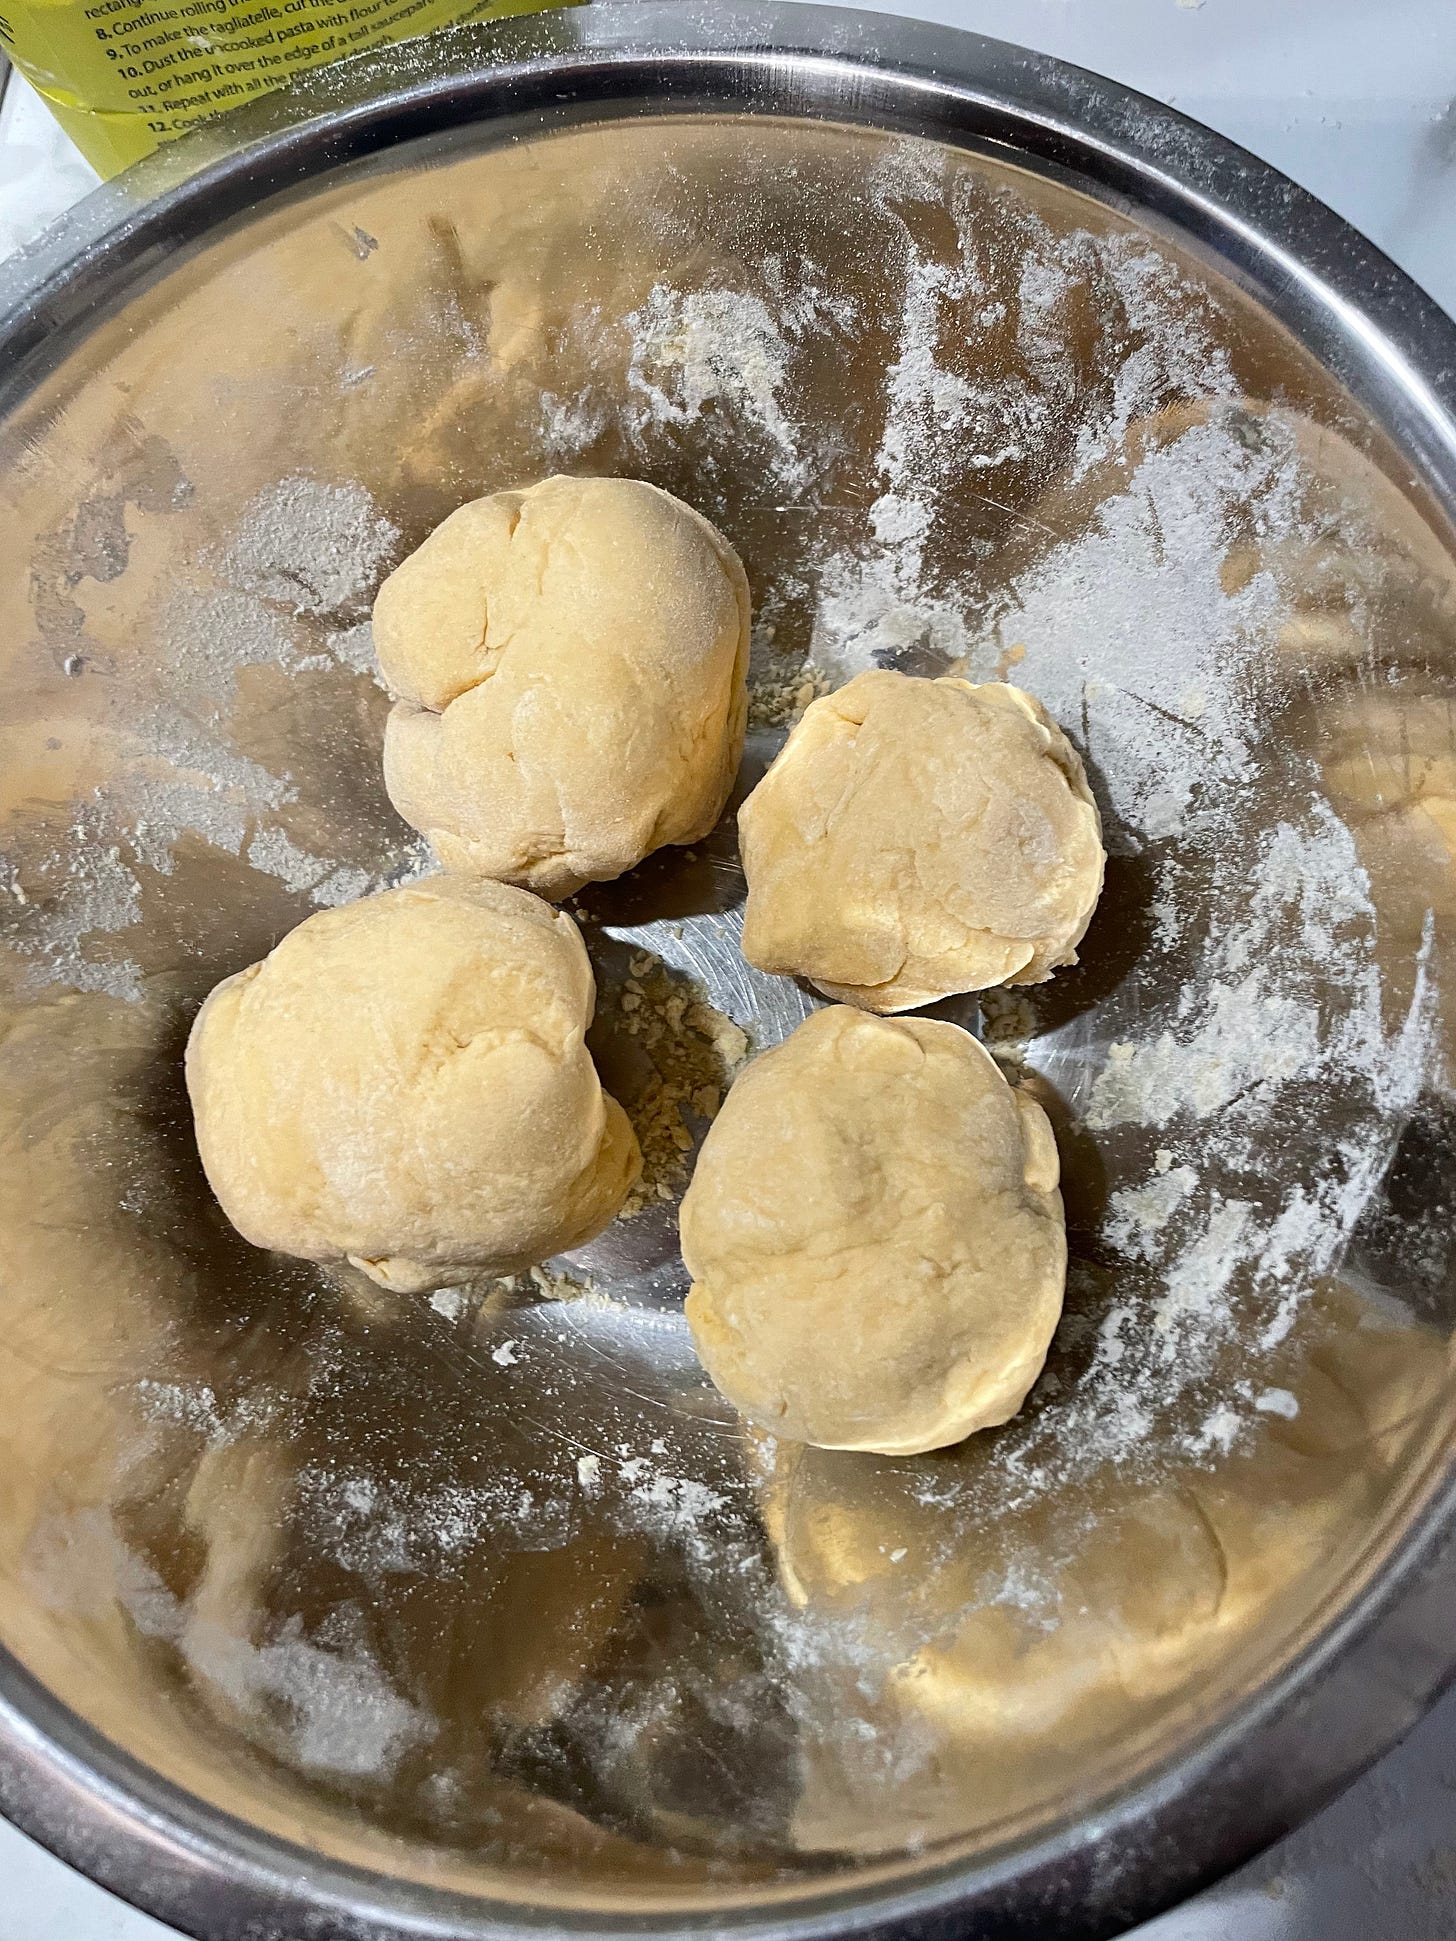 Showing how pasta dough should look when it's divided into 4 bundles and allowed to cool before it's run through a pasta machine.